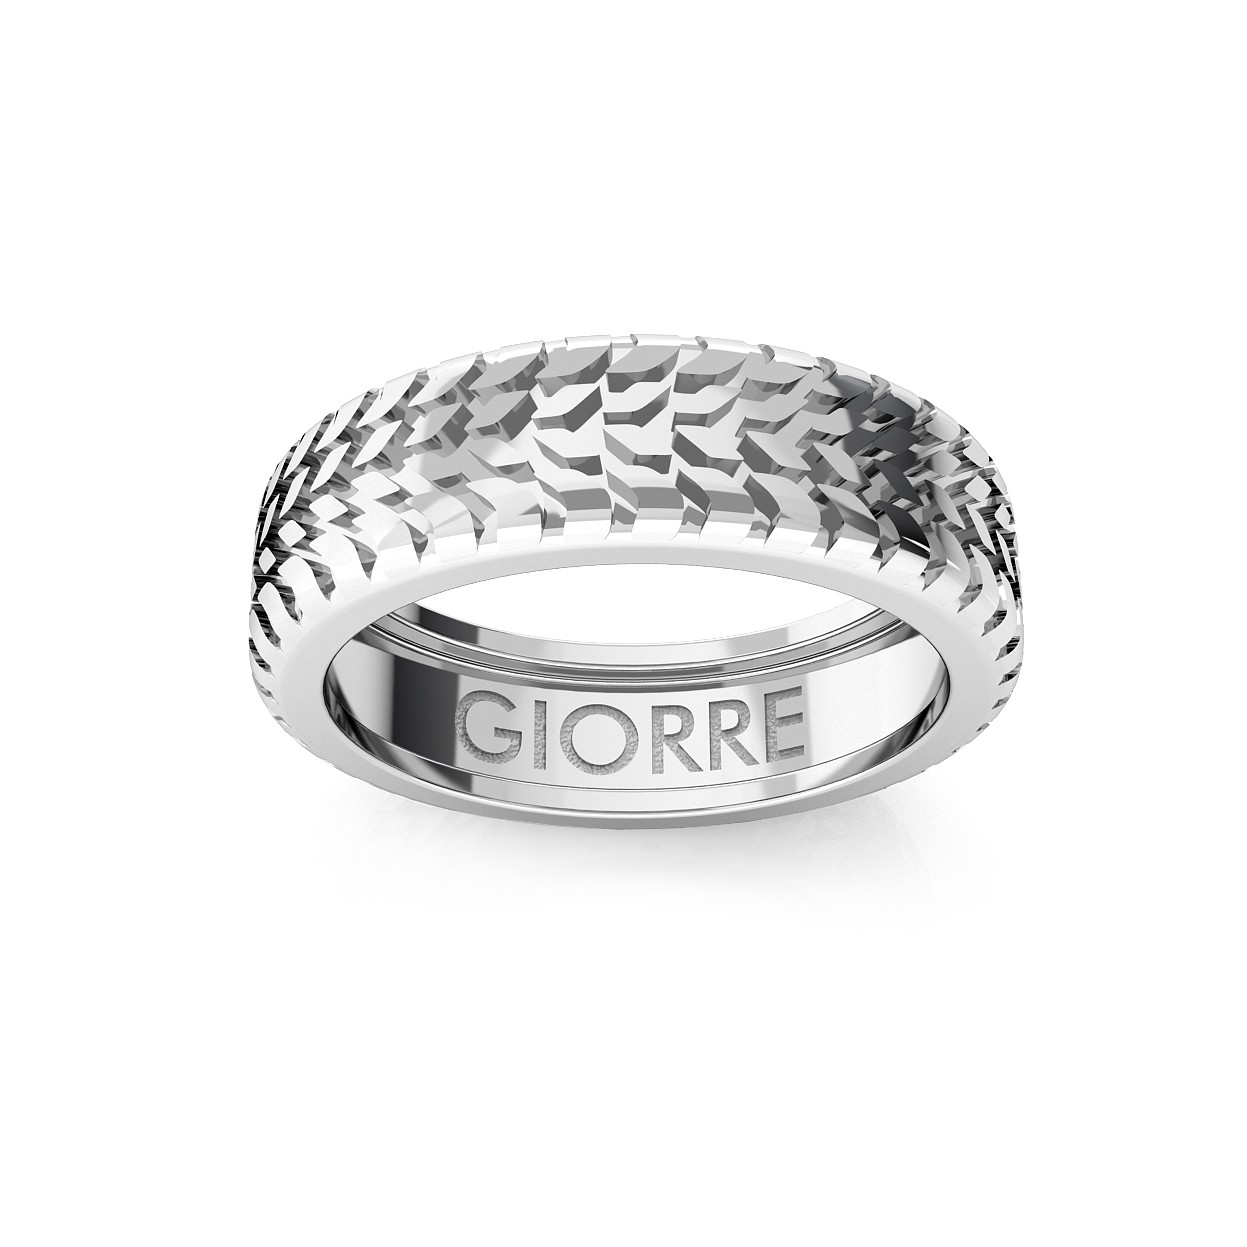 GIORRE CAR TIRE CHARMS 207